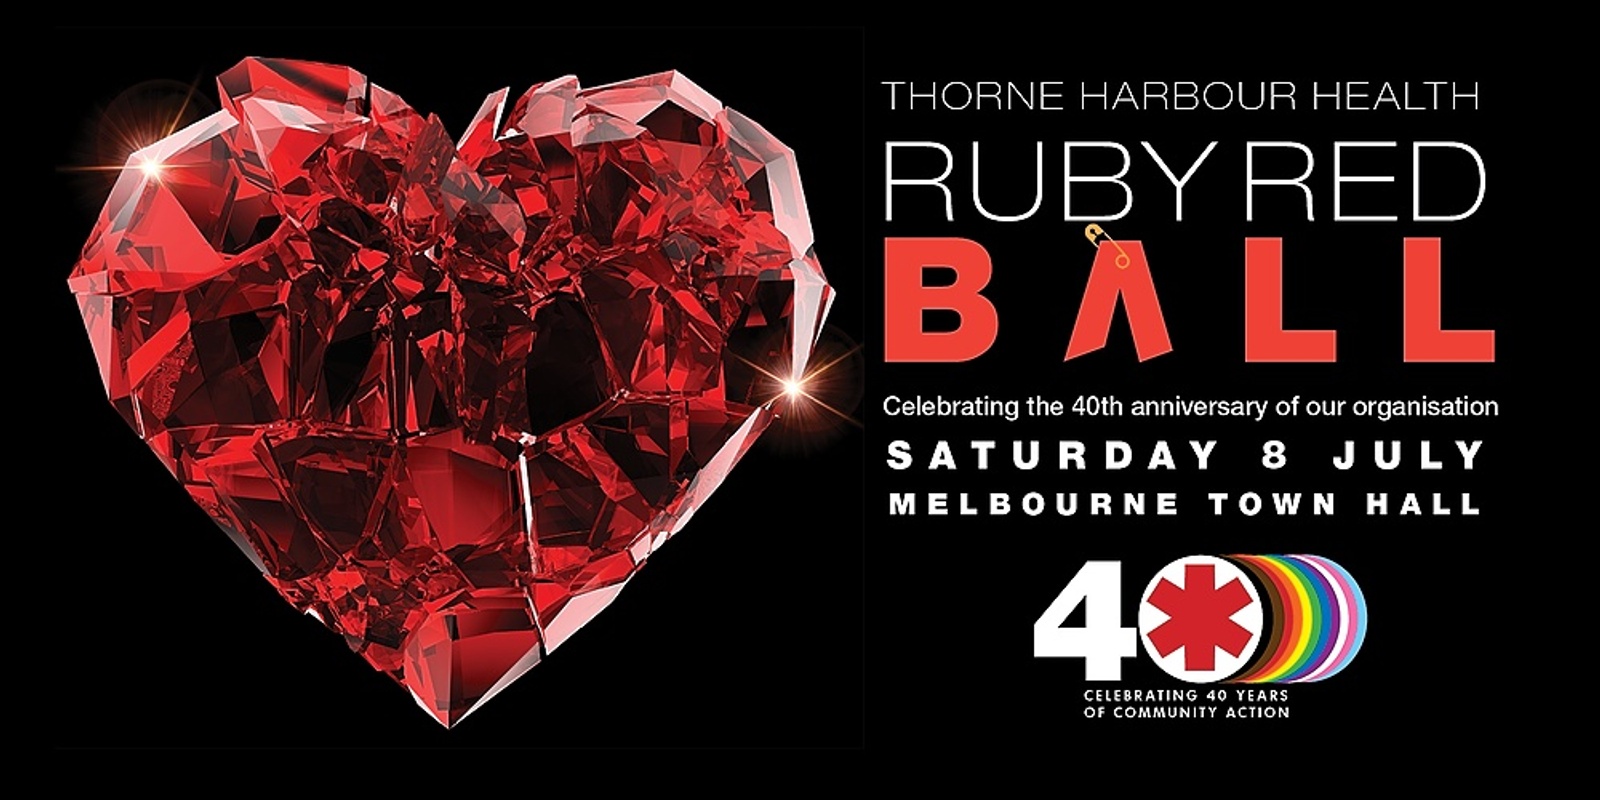 Thorne Harbour Health presents the 40th Anniversary Ruby Red Ball 